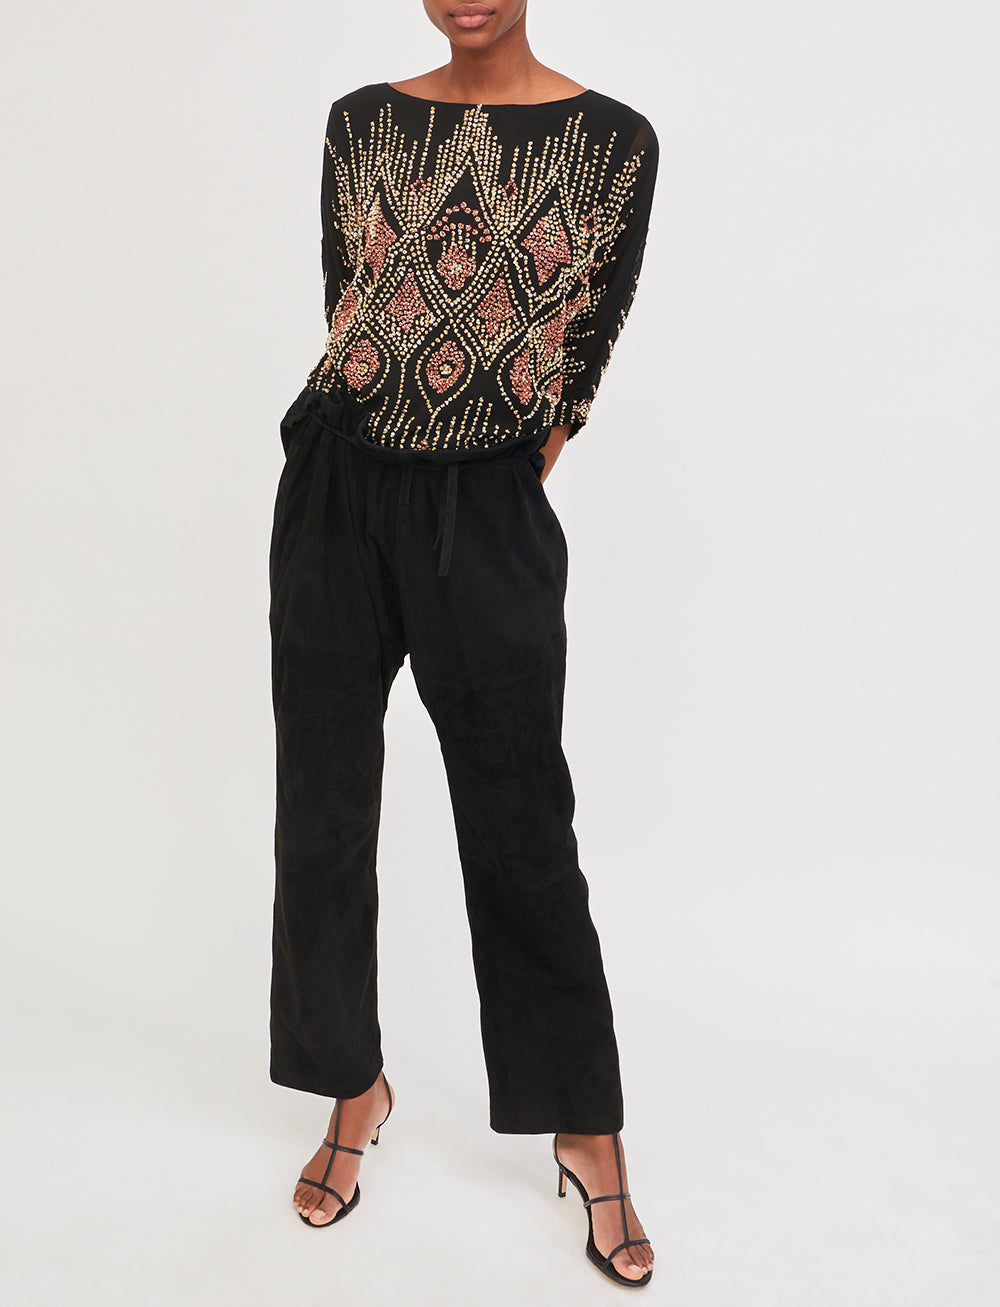 Emilie sequin-embroidered top